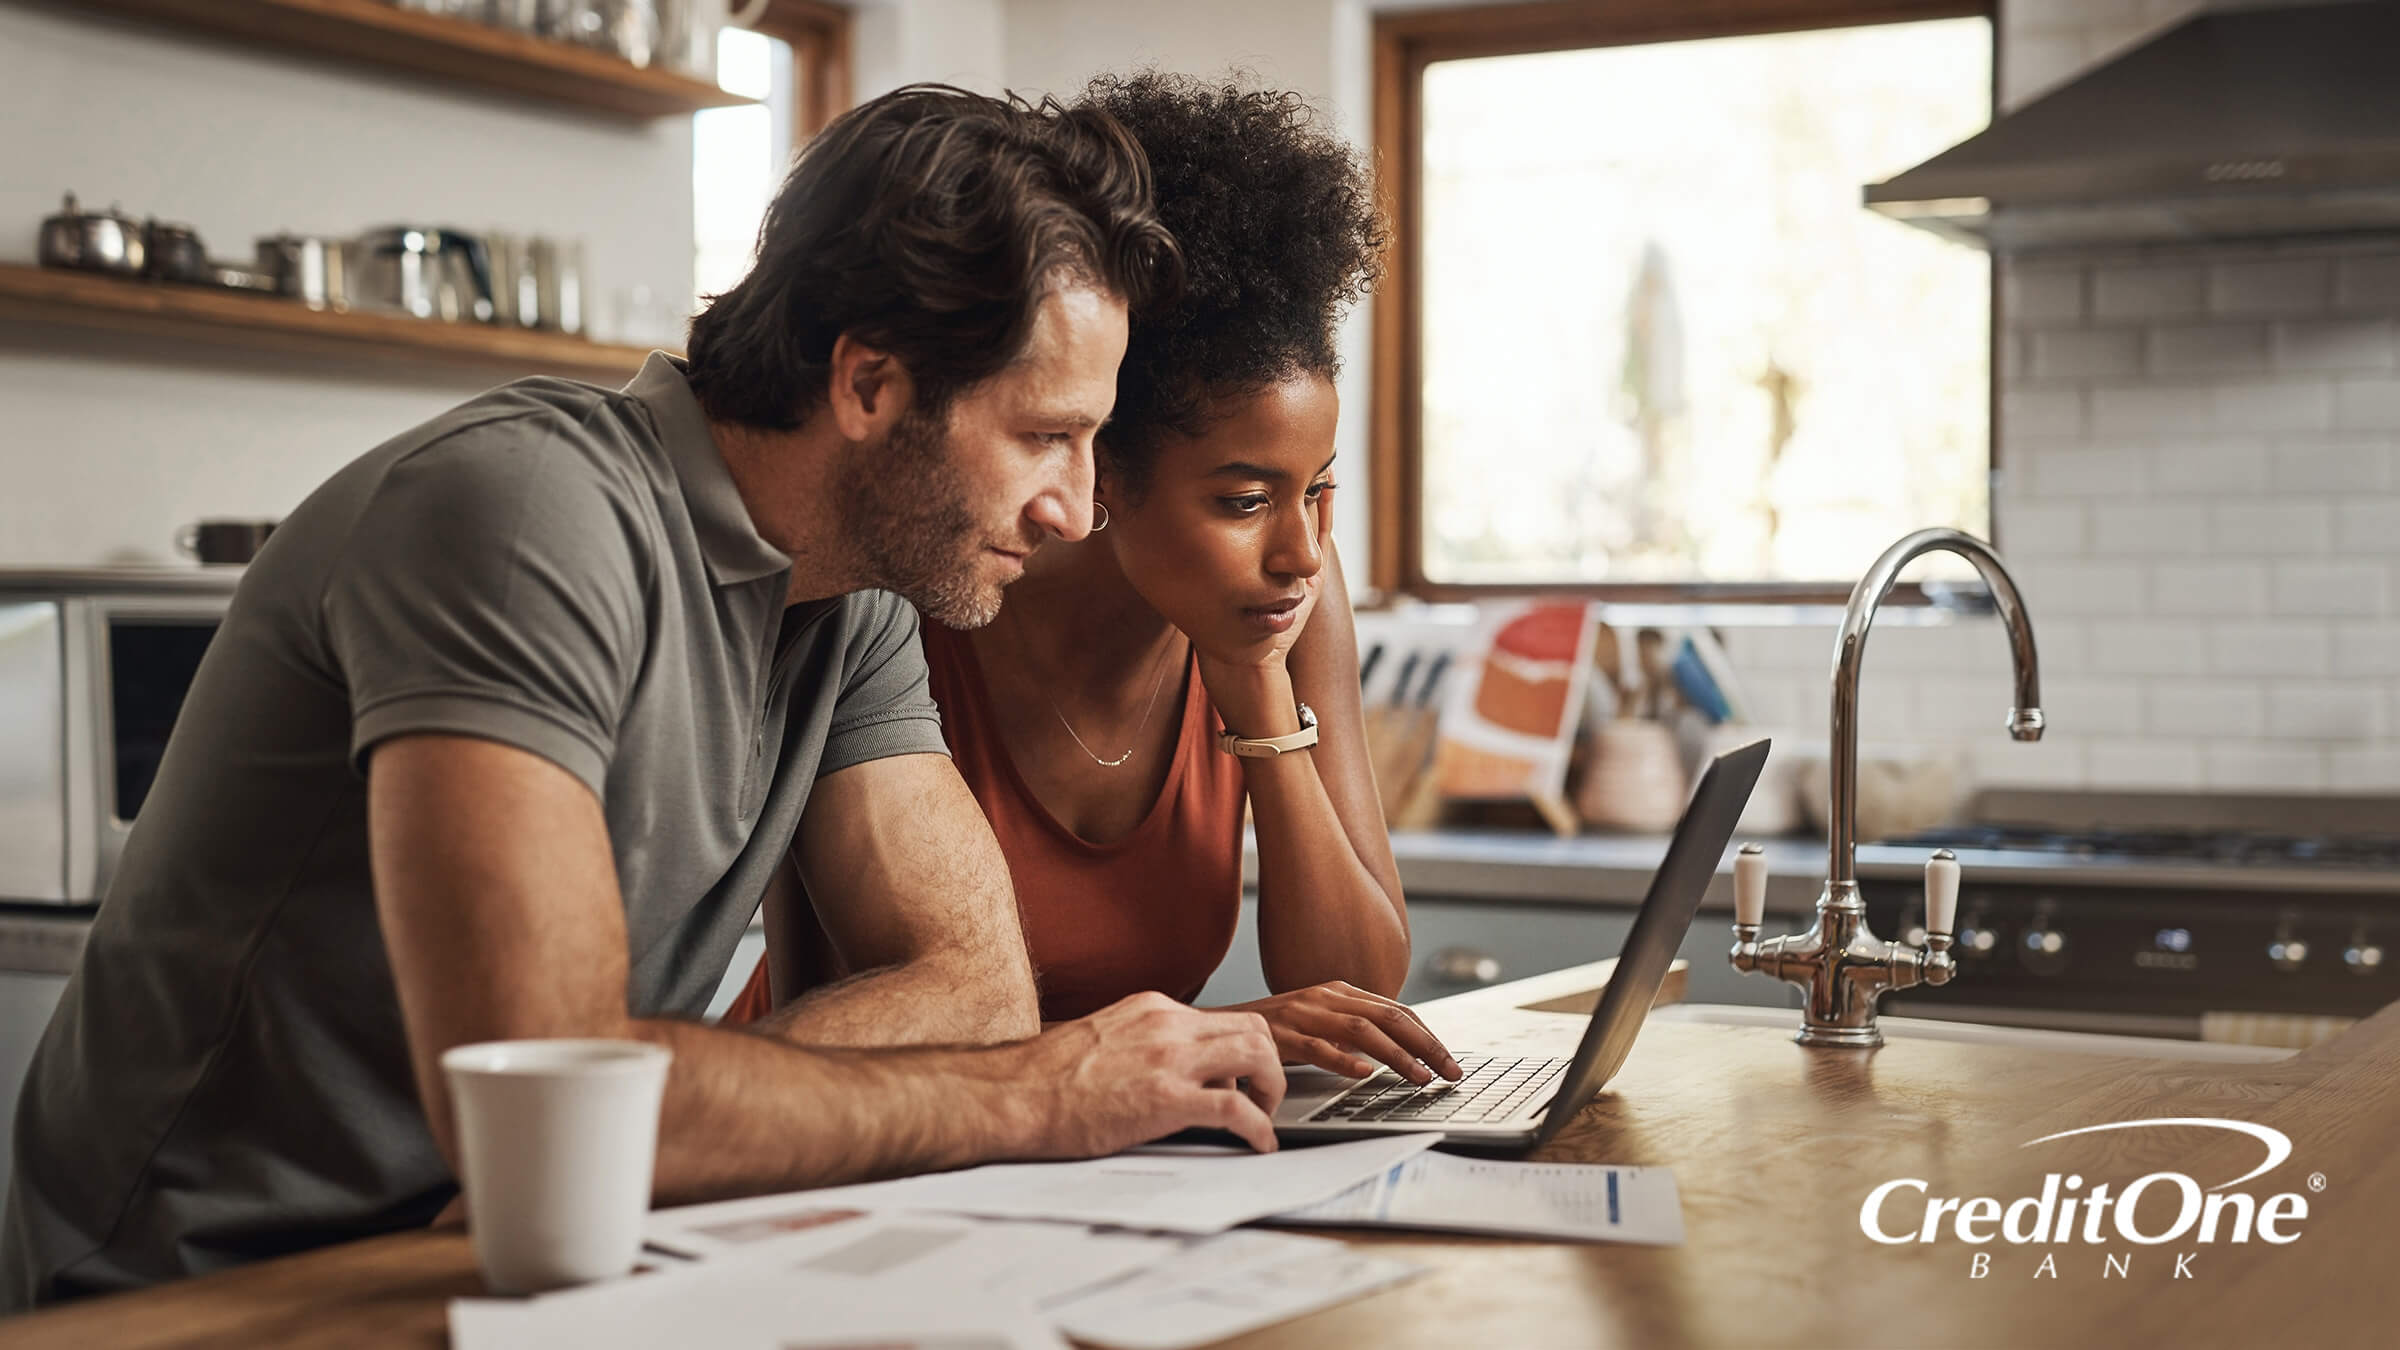 A man and woman browse on their laptop with financial paperwork on the countertop next to them, reviewing their finances for ways to protect their credit scores during a recession.